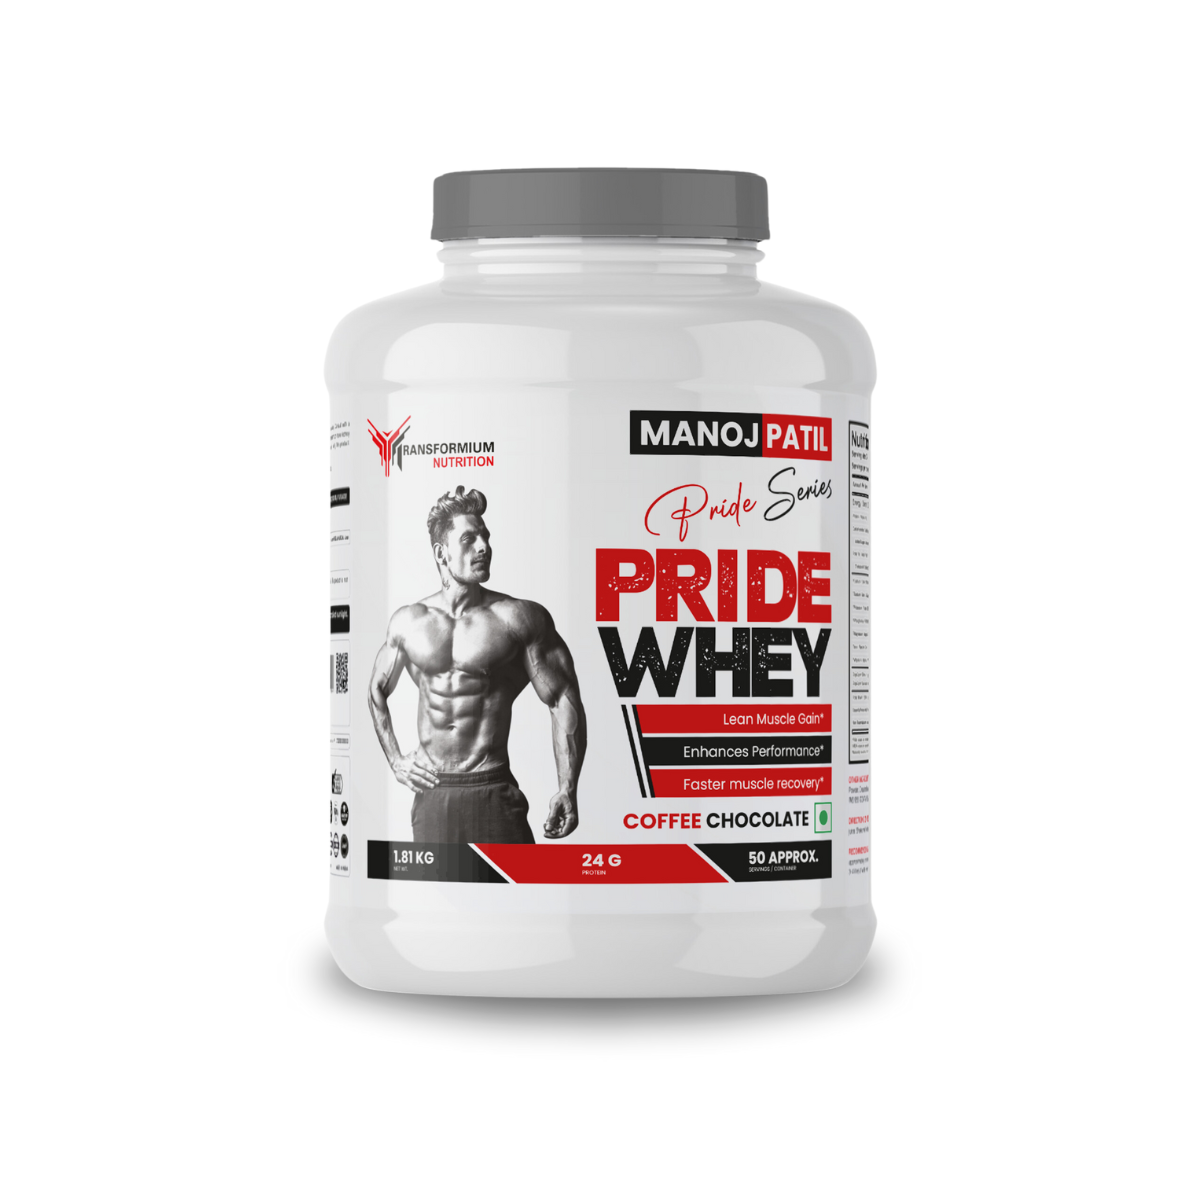 Pride Whey  - The best protein in India